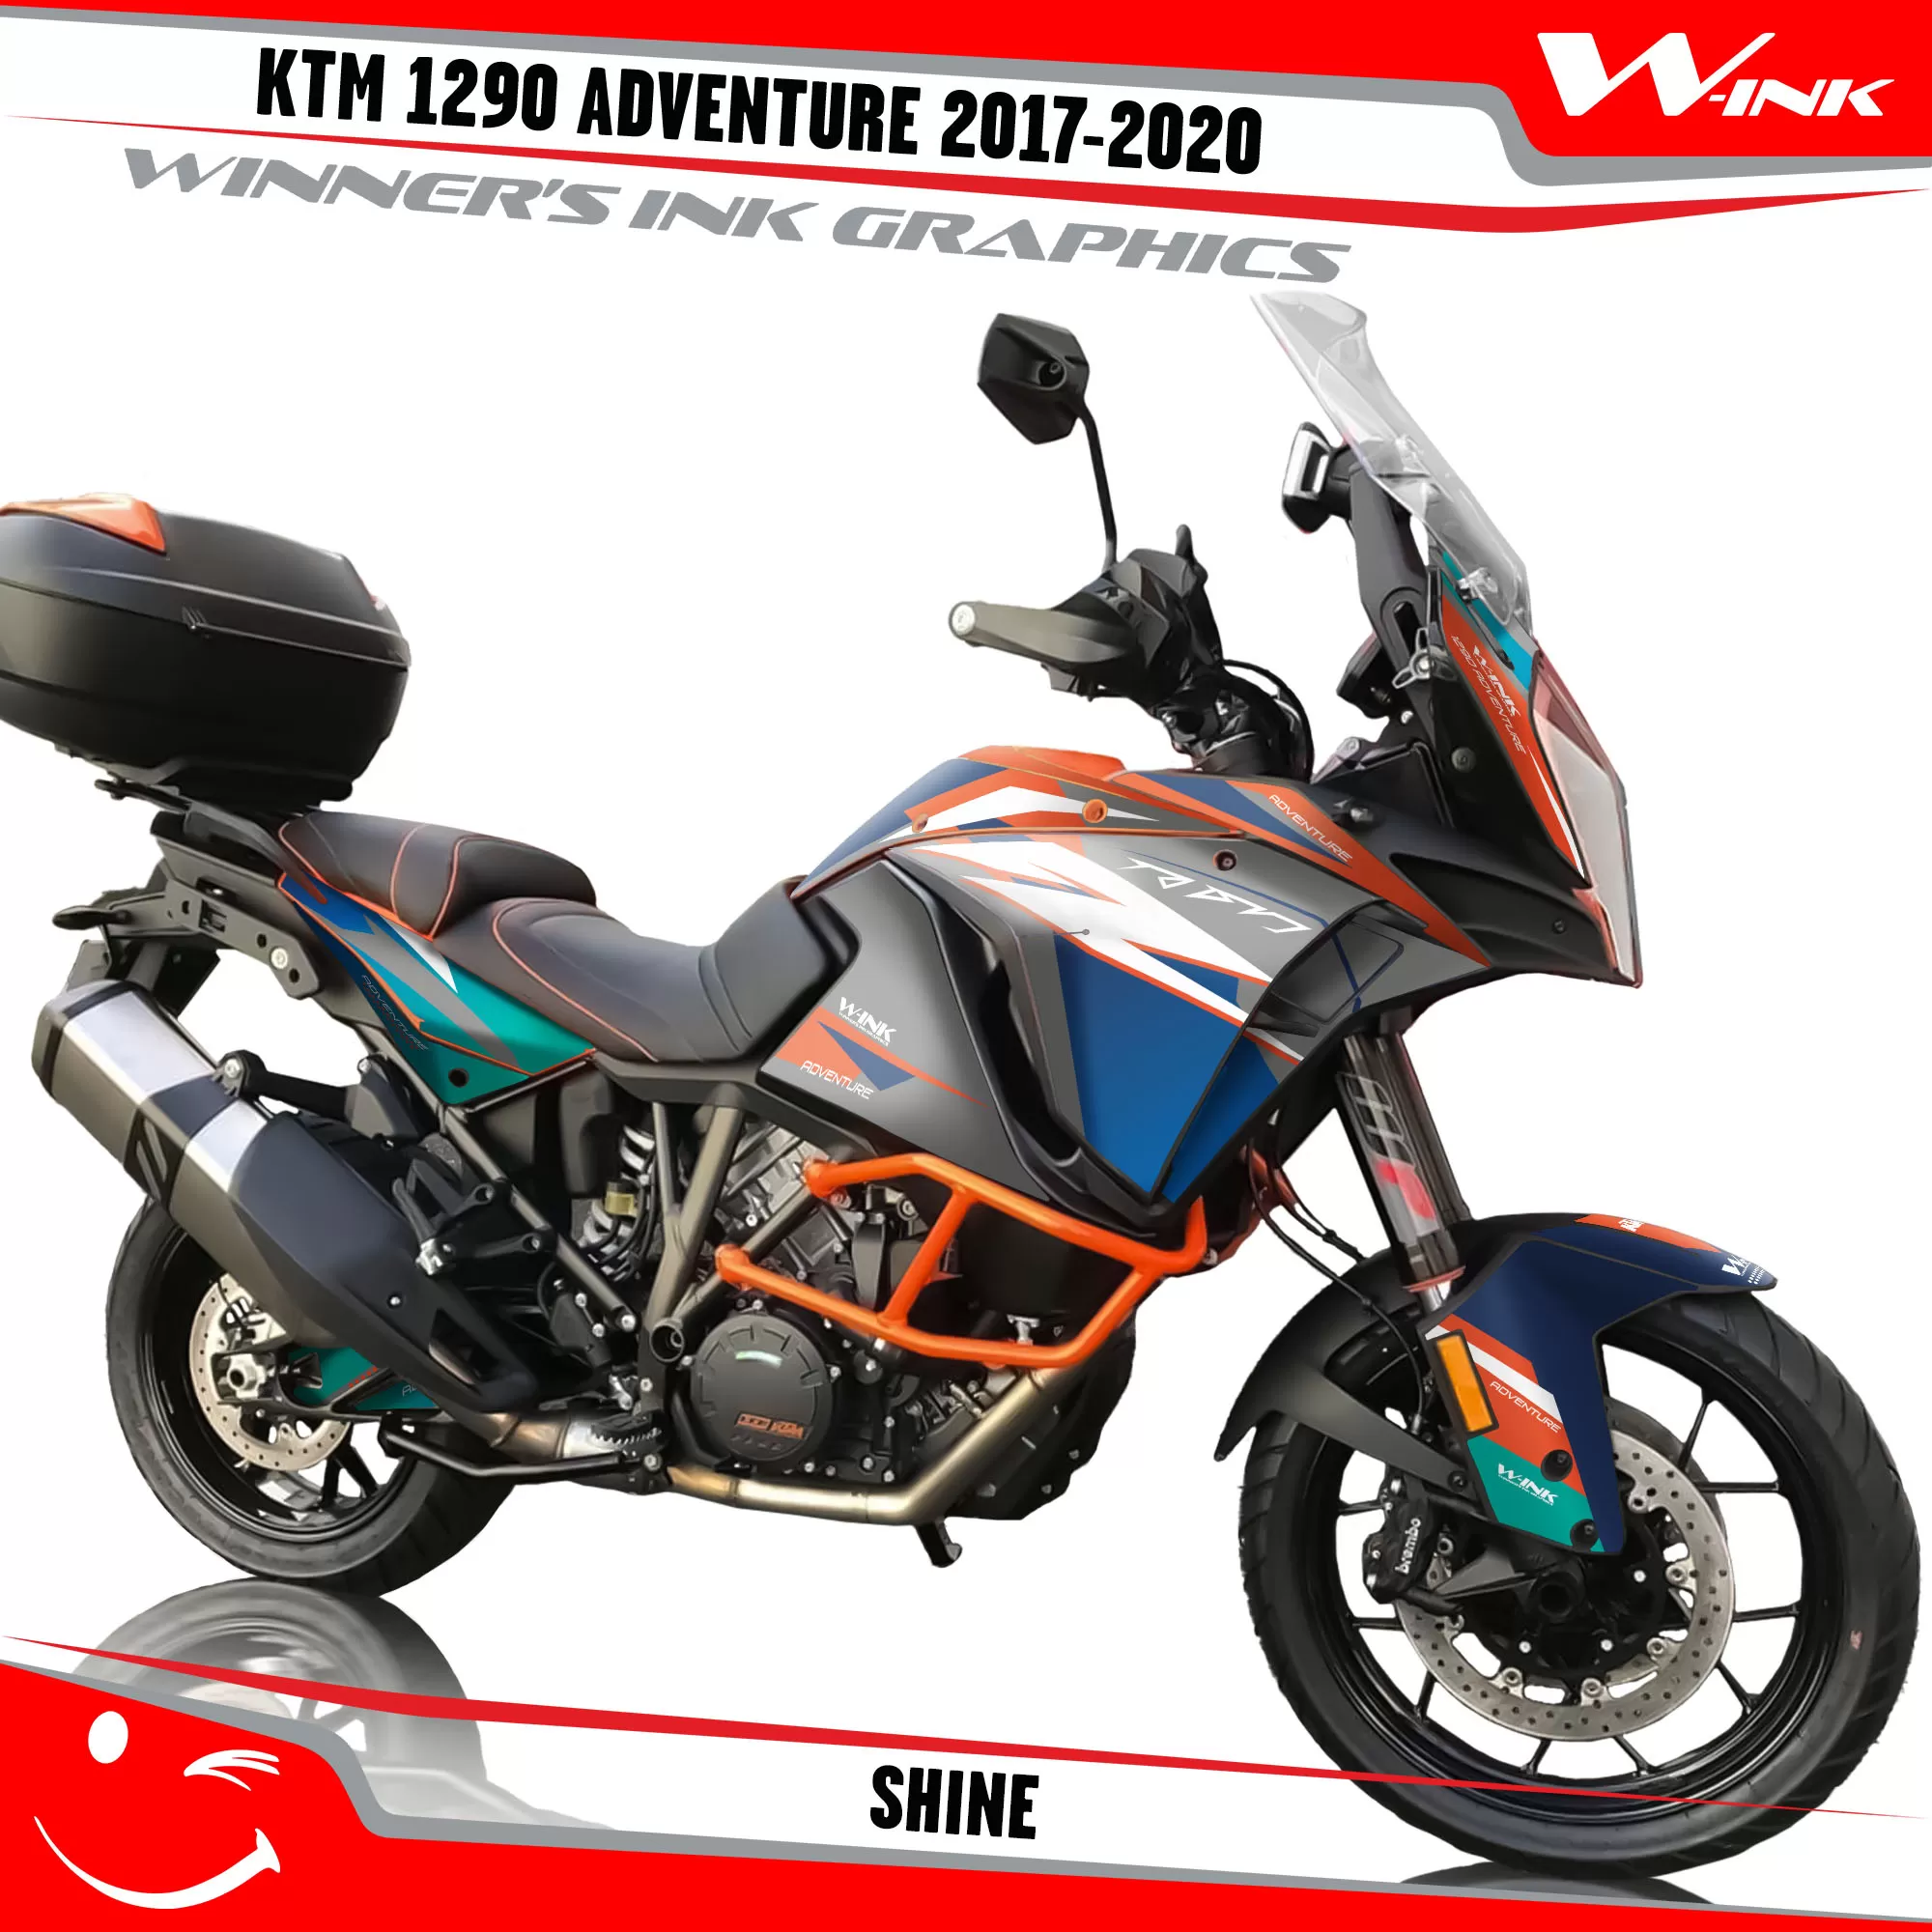 KTM-Adventure-1290-2017-2018-2019-2020-graphics-kit-and-decals-Shine